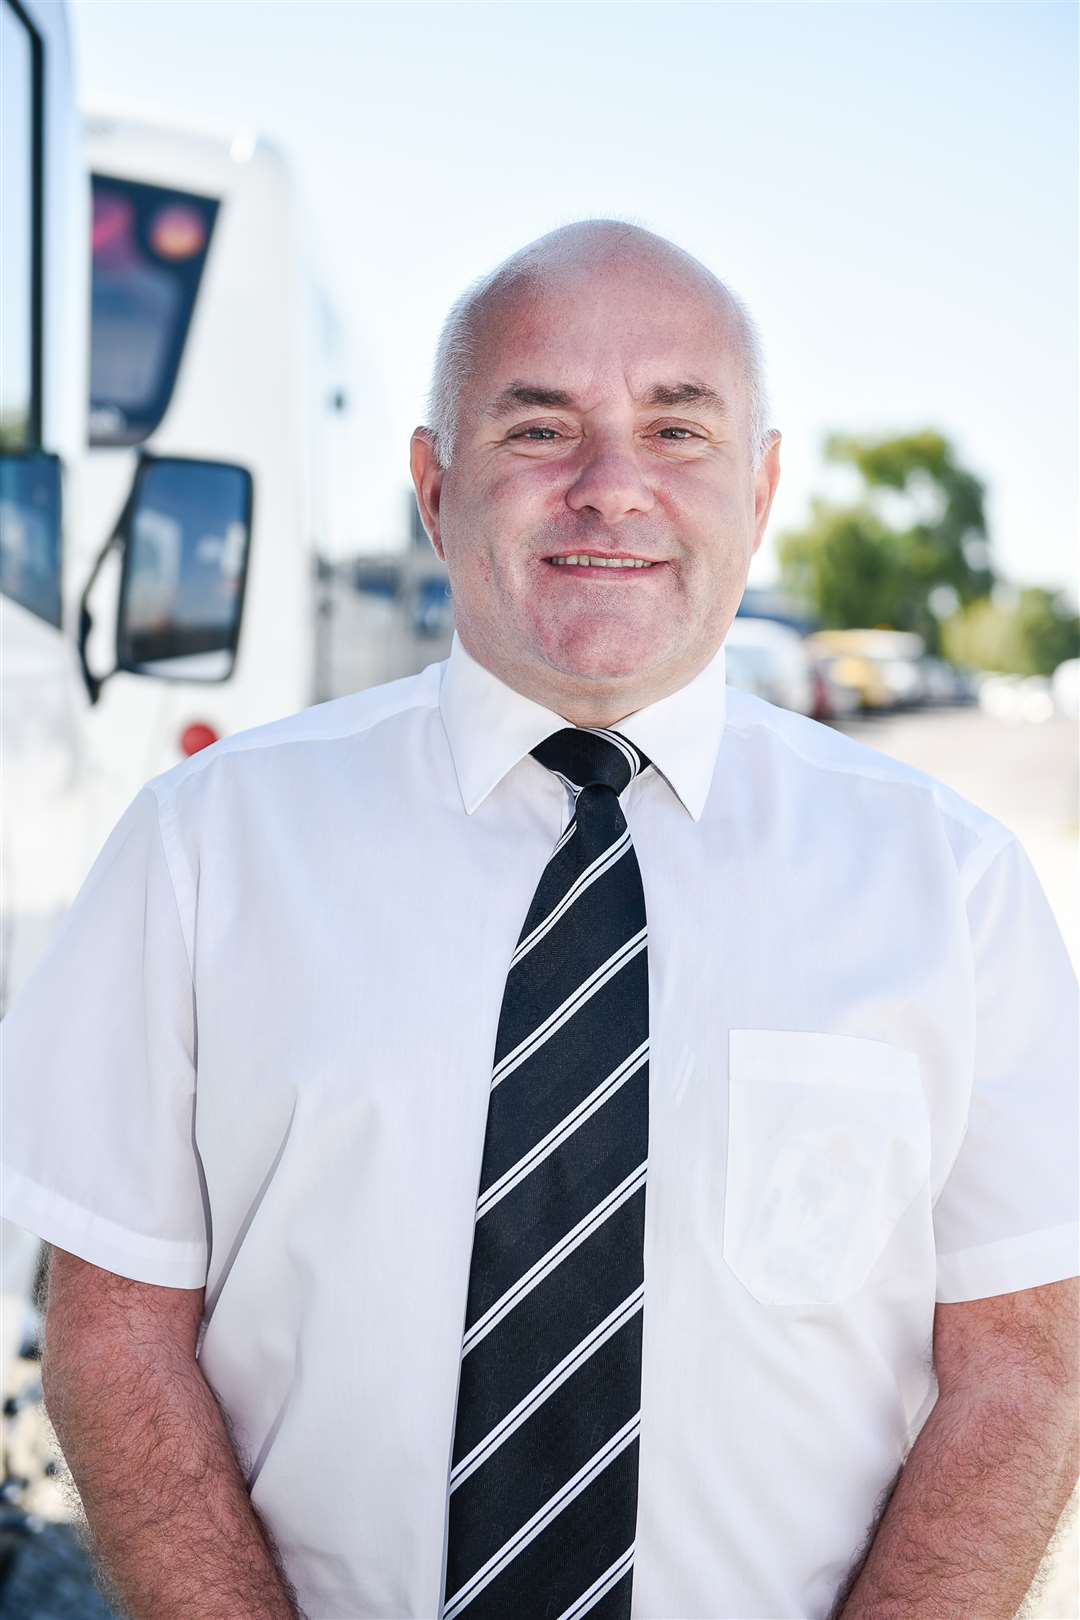 Commercial and marketing manager Paul Jeffries